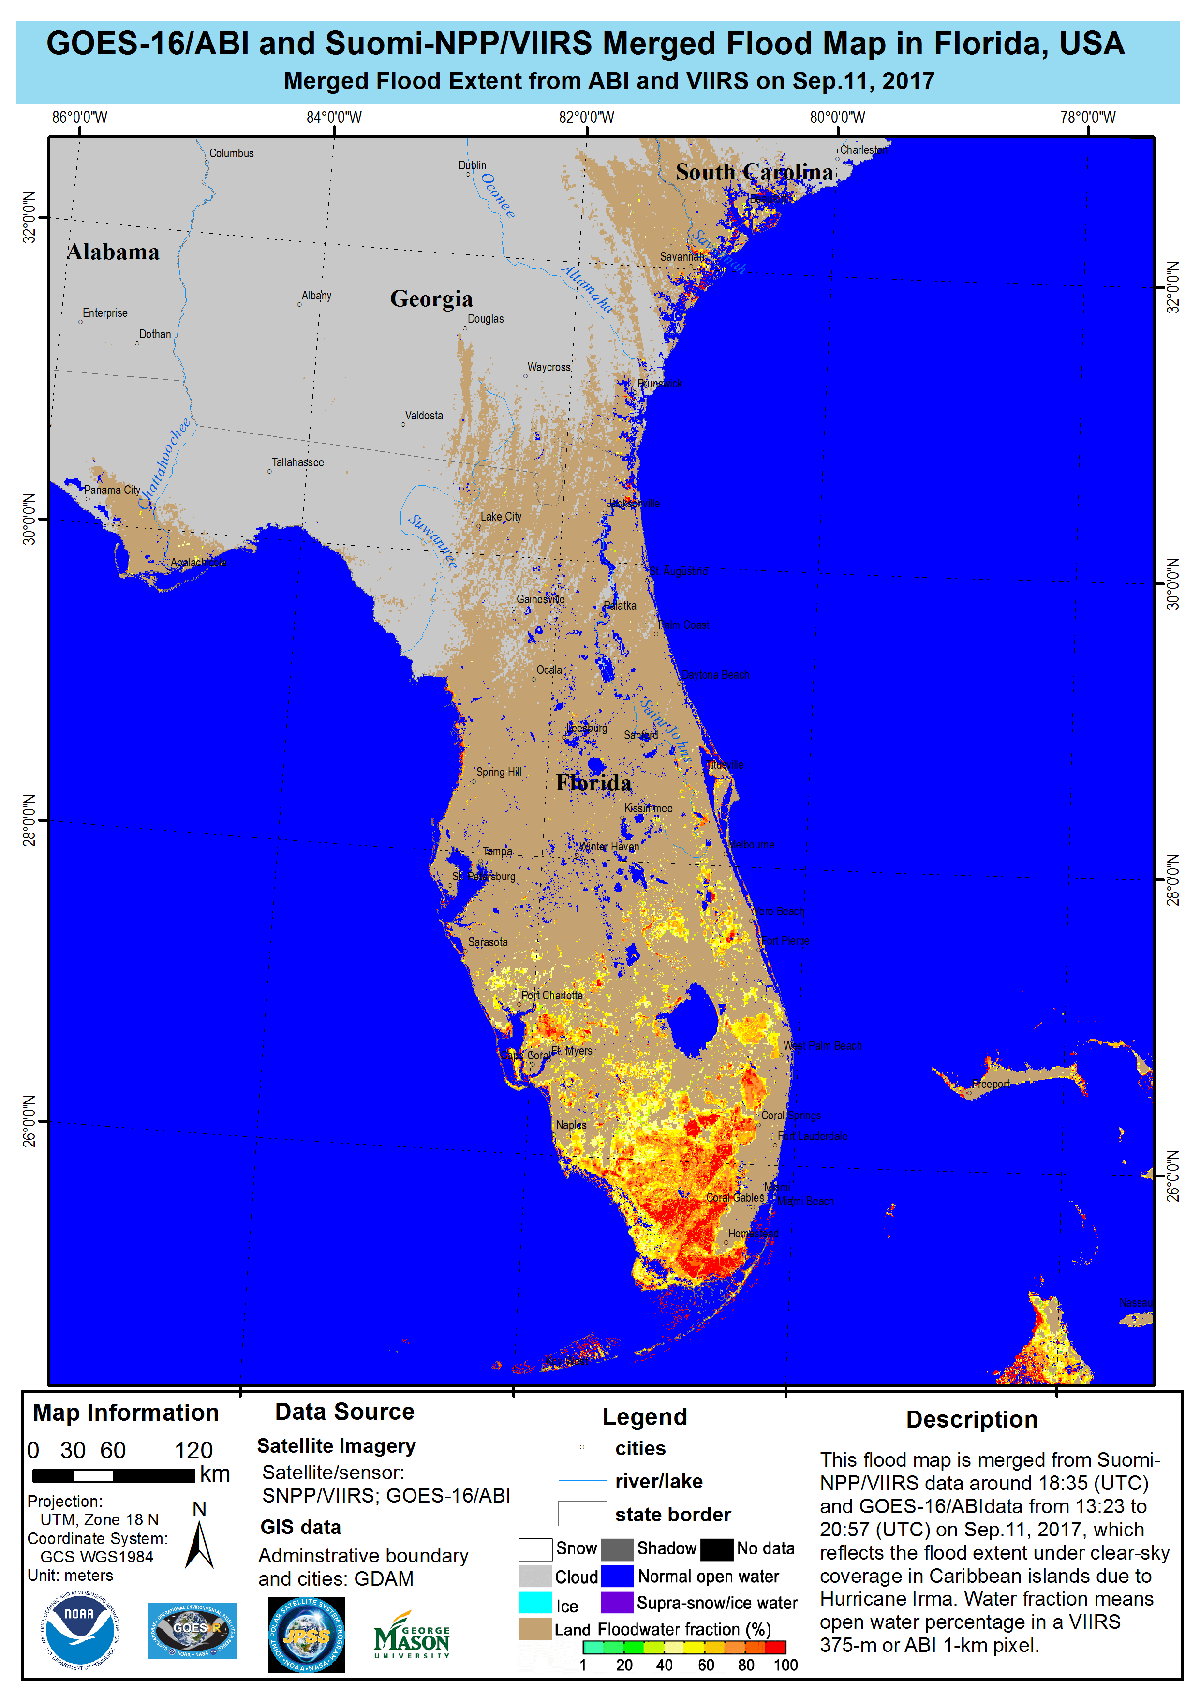 This flood map shows the impact of Hurricane Irma in Florida on Sept. 11, 2017. Colors correspond to the fraction of land covered by water, ranging from green (less than 30 percent) to red (more than 90 percent).